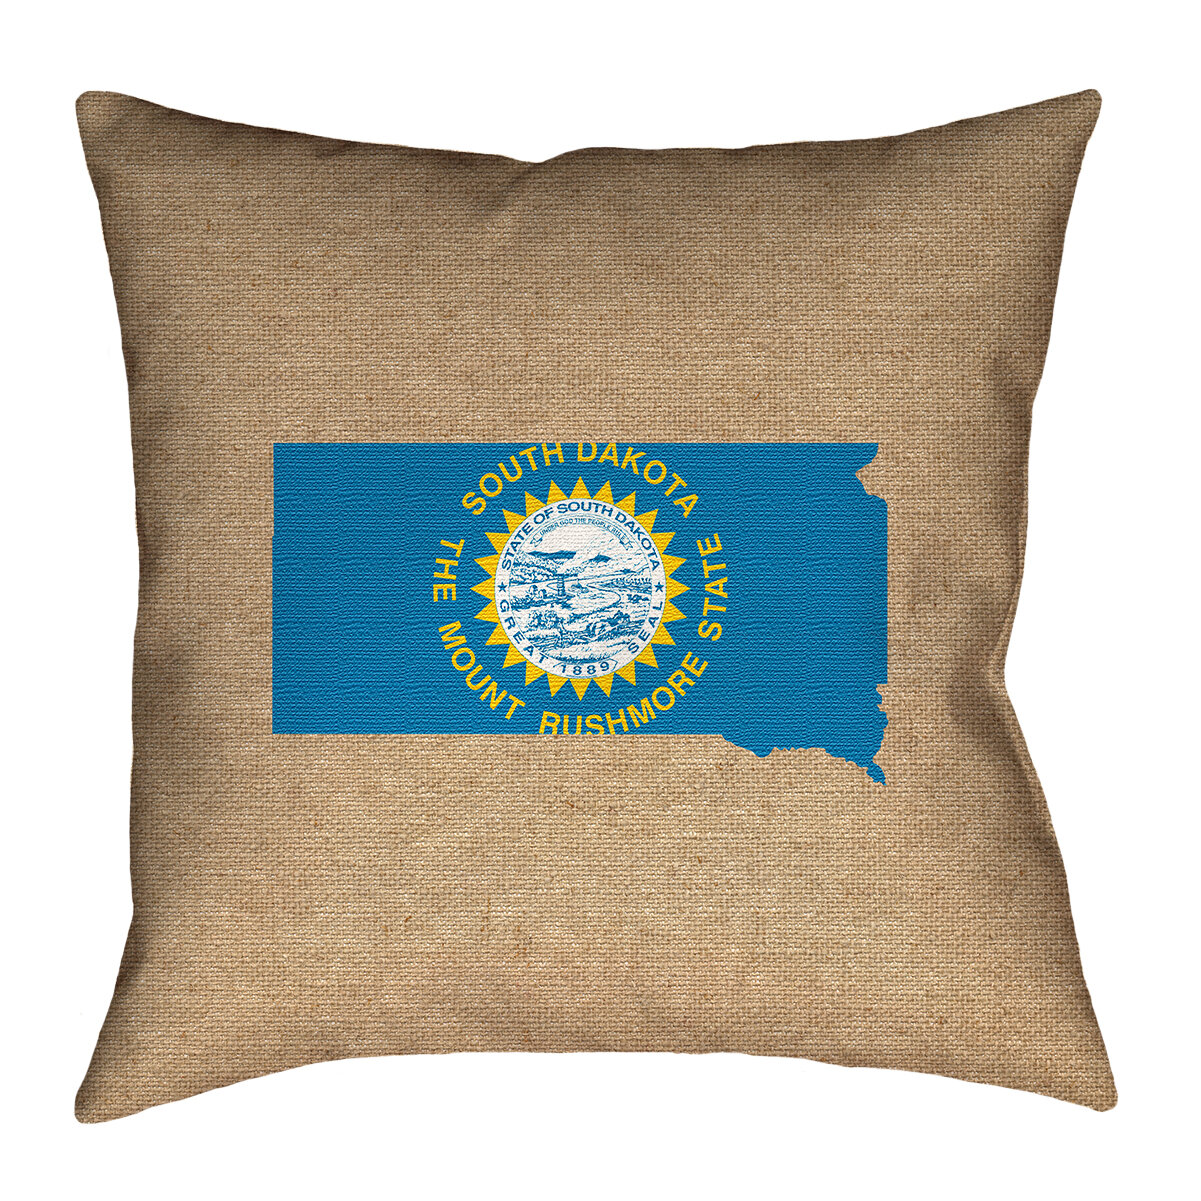 ArtVerse Katelyn Smith 28 x 28 Floor Double Sided Print with Concealed Zipper & Insert Idaho Love Pillow